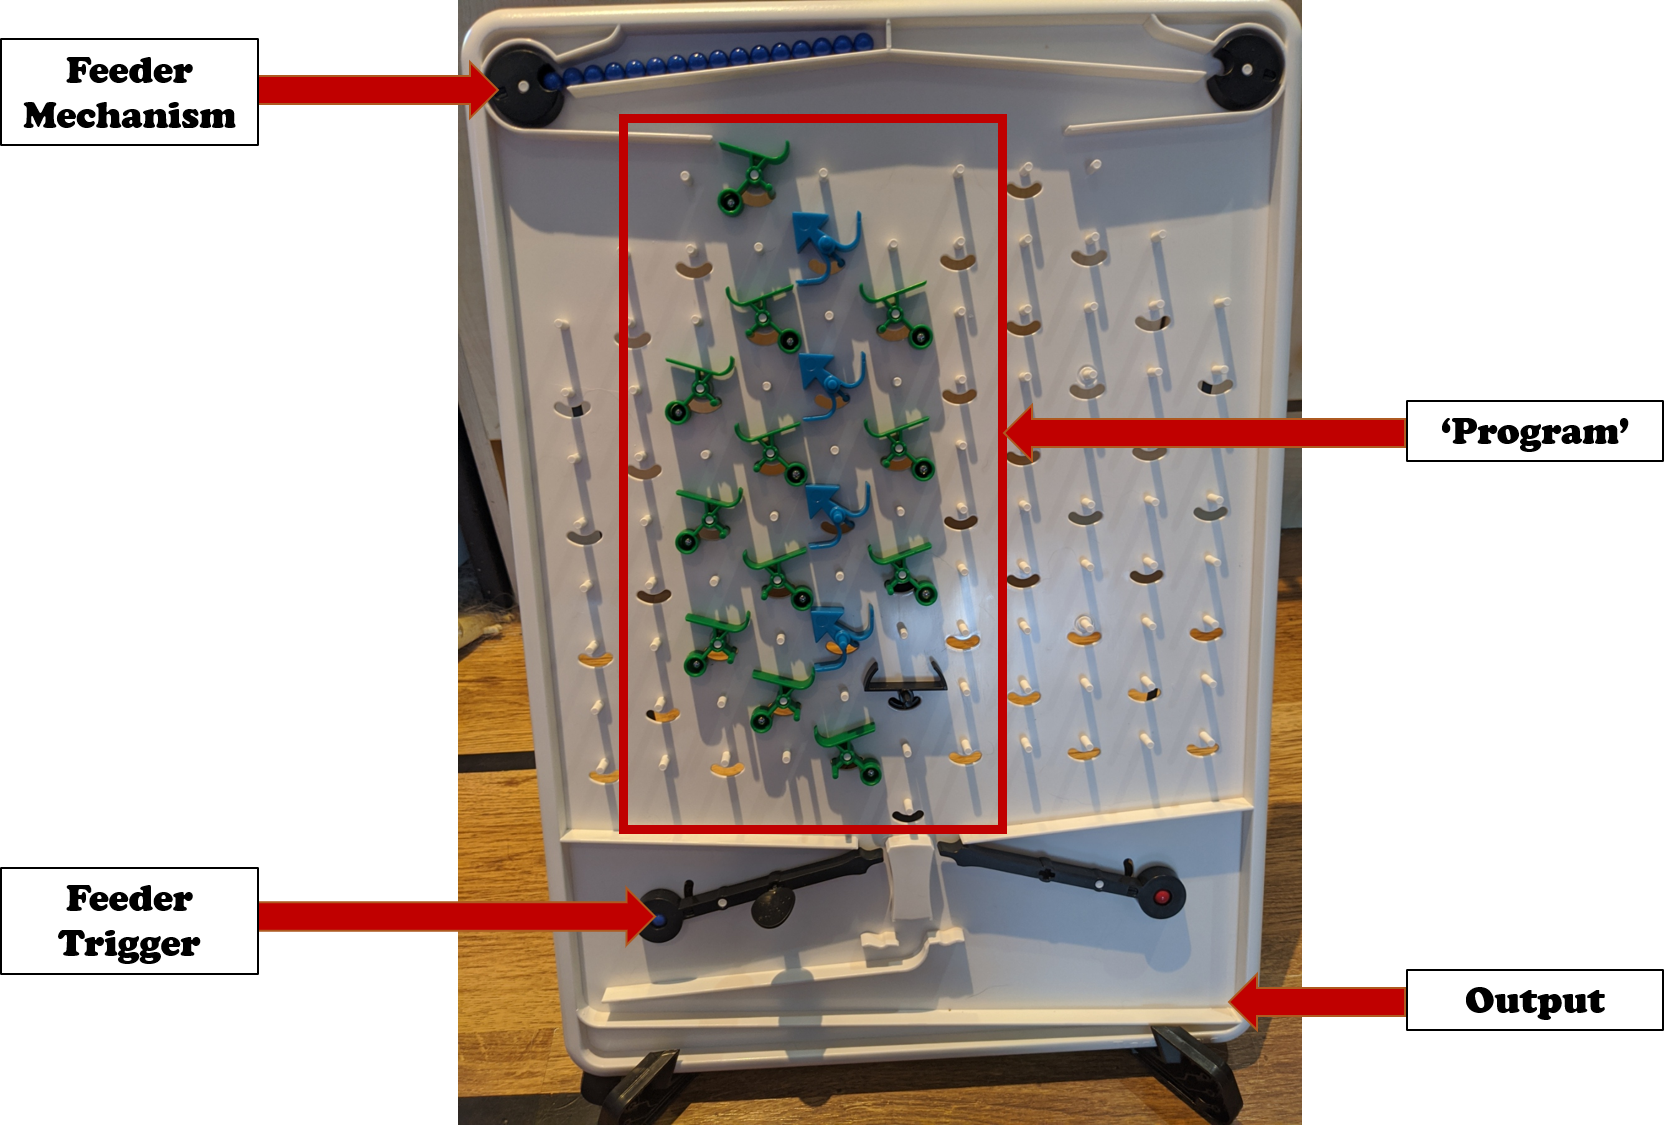 A vertical marble drop with various parts inserted. The ball feeder leads a marble onto a ramp towards the first switch of four in a vertical column. If a switch is in the 'off' position it will roll the marble to the right where a ramp will redirect it to the next switch in the column. On the fourth switch if 'off' the marble will be fed into a stopper ending the 'program'. If a switch is in the 'on' position it will feed the ball onto a series of ramps on the left, away from the other switches and towards the base of the ball-drop where it will trigger the release of the next ball before resting in the output tray.